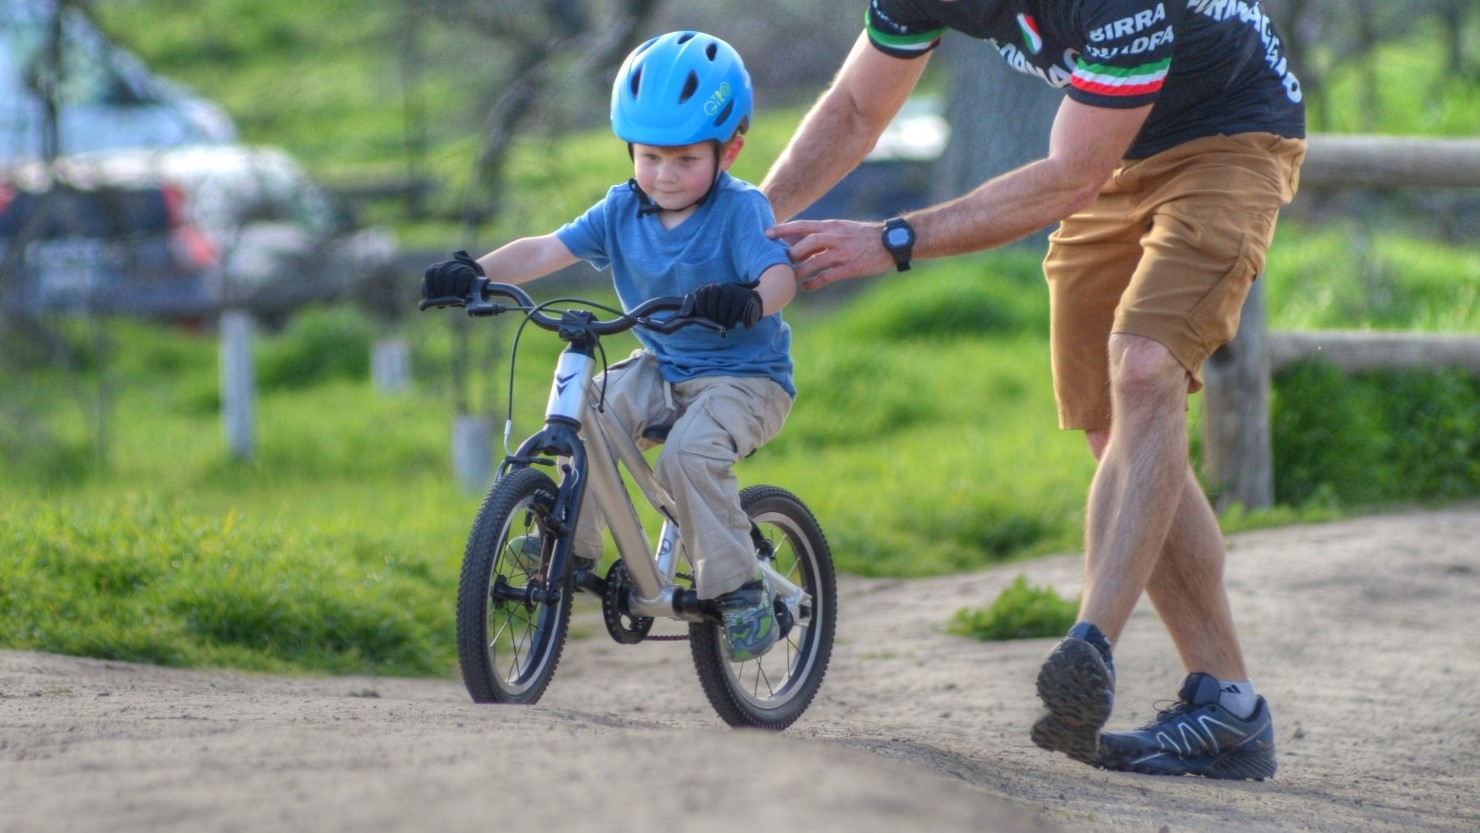 Teaching Kids to Ride a Bike Can Be Emotional—So I Learned